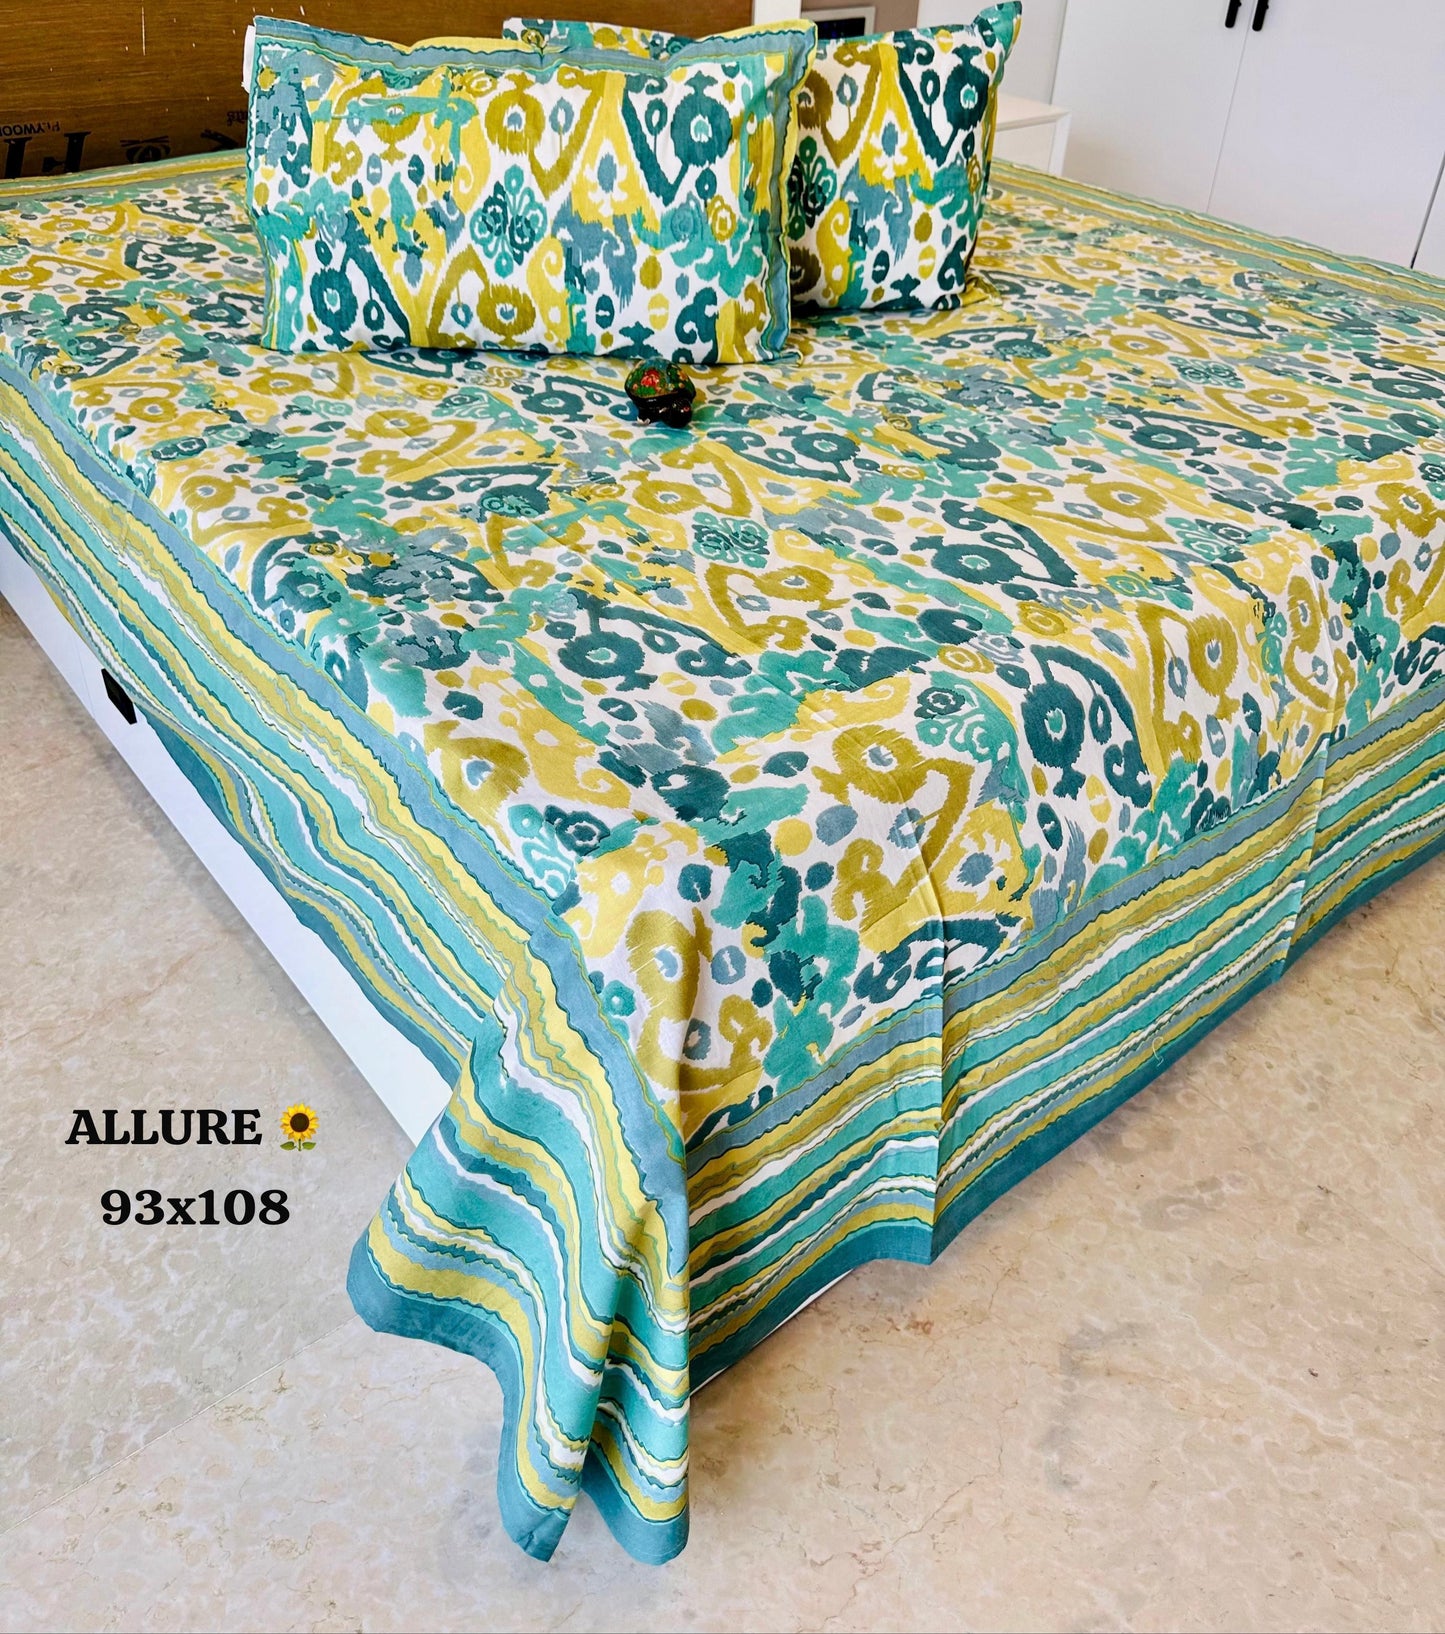 Suhani Summer Cotton Thin Printed Bedspread  Bedcover (King 93x108 inches)